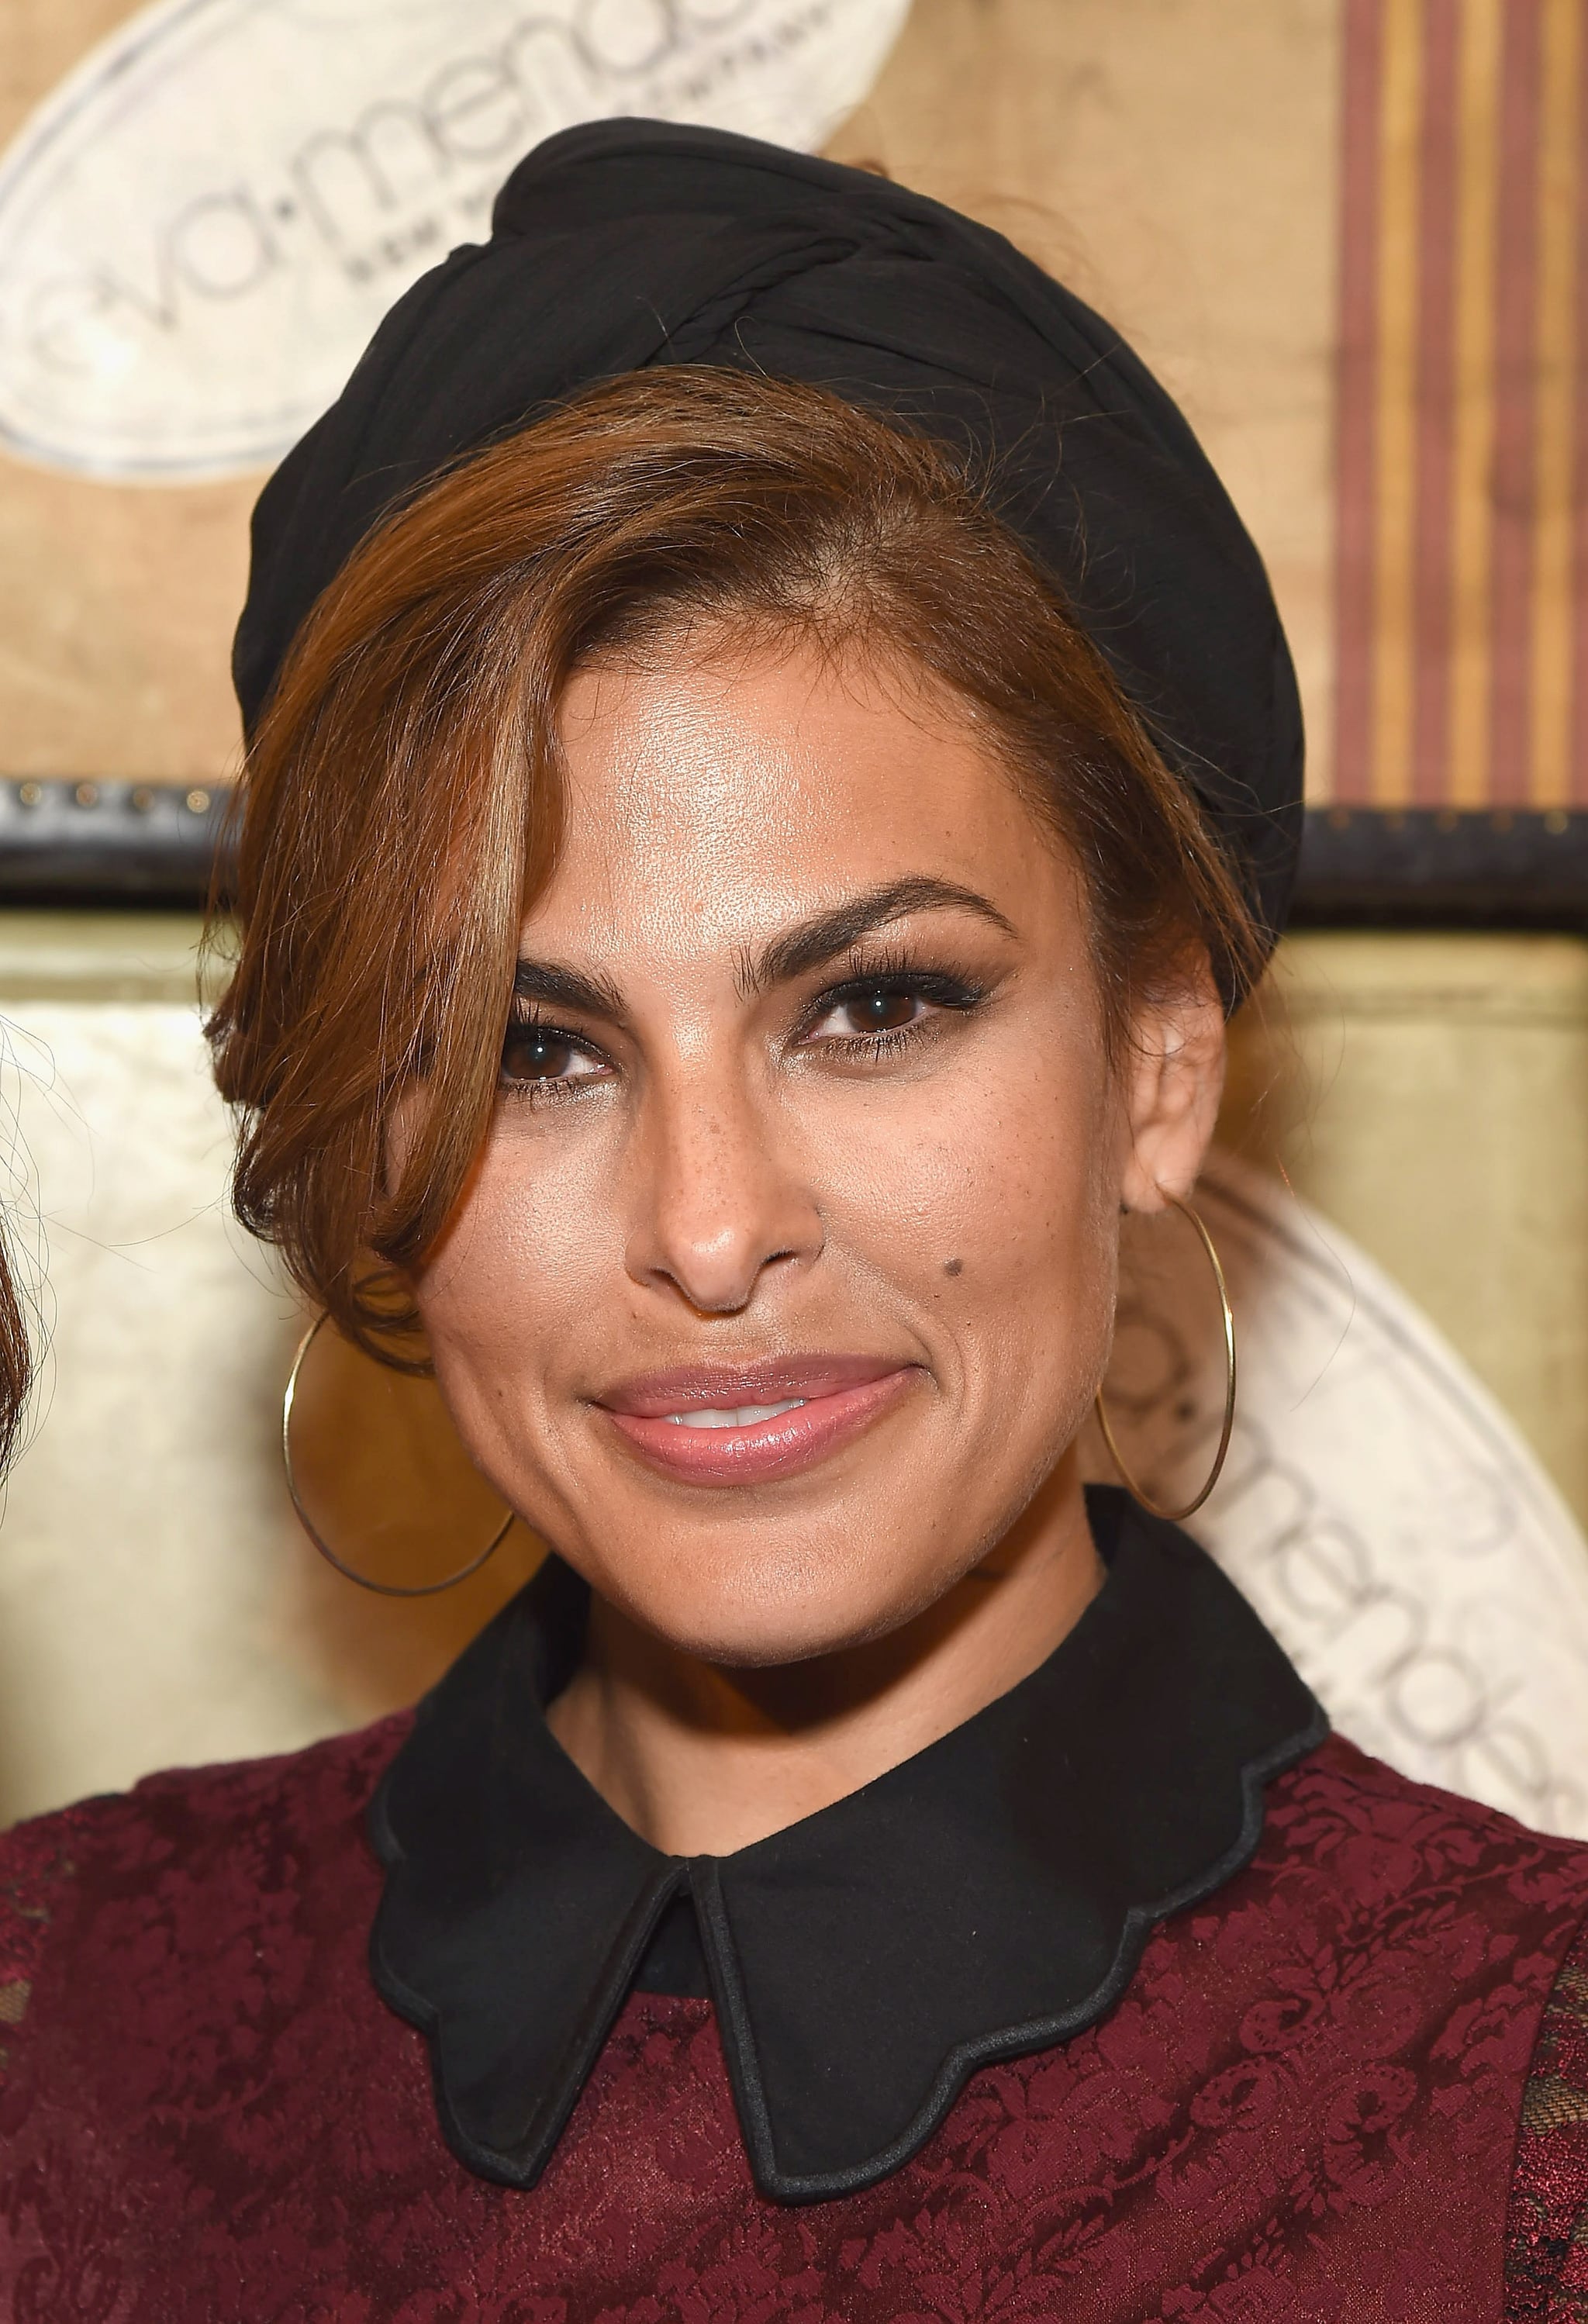 NEW YORK, NY - SEPTEMBER 06:  Actress and designer Eva Mendes attends the Eva Mendes X New York & Company FW 16 Show at Academy Mansion on September 6, 2016 in New York City.  (Photo by Gary Gershoff/WireImage)